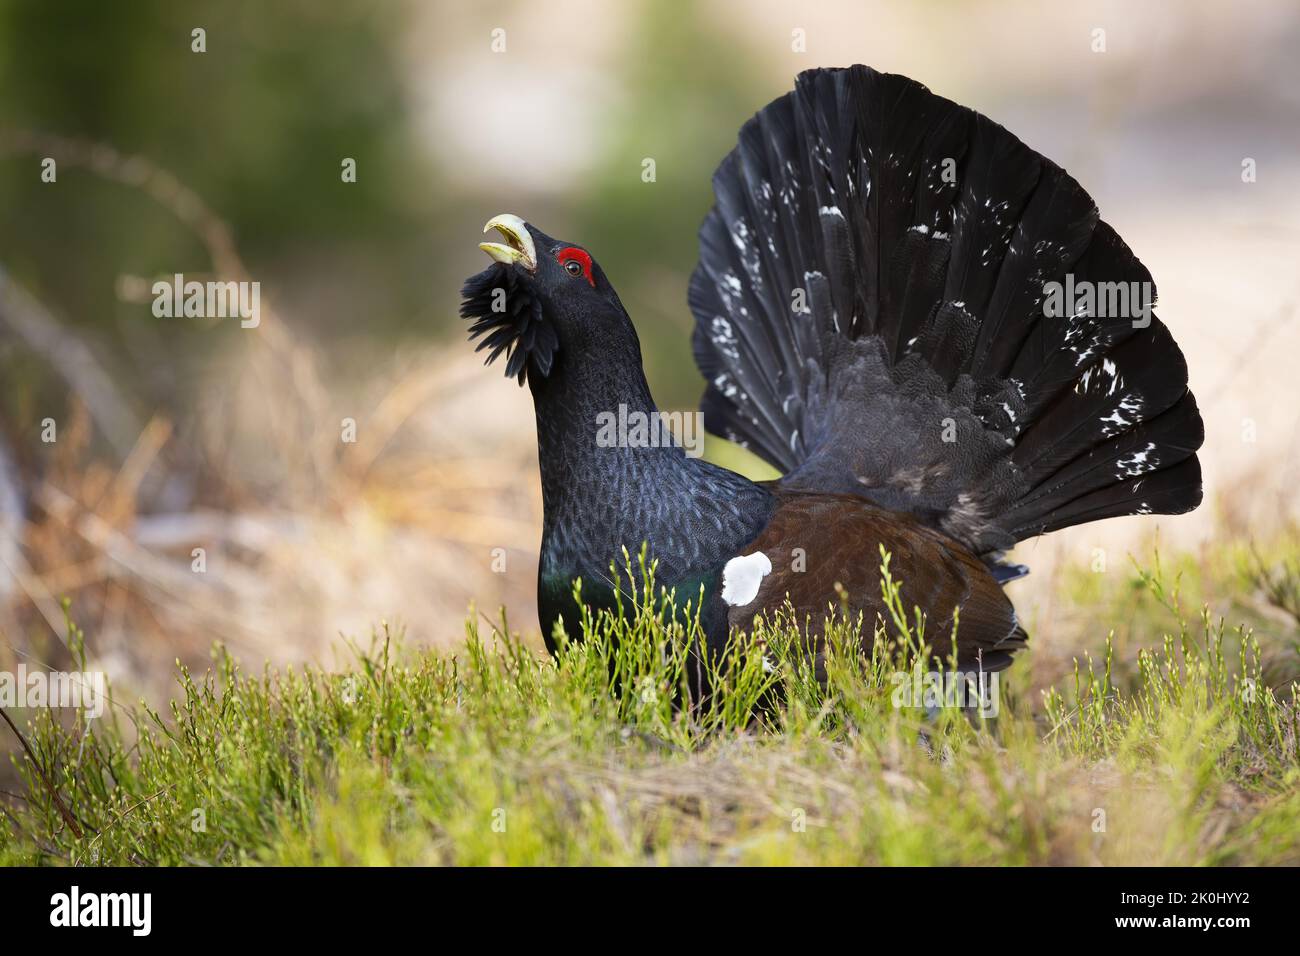 Western capercaillie lekking on grass in autumn nature Stock Photo